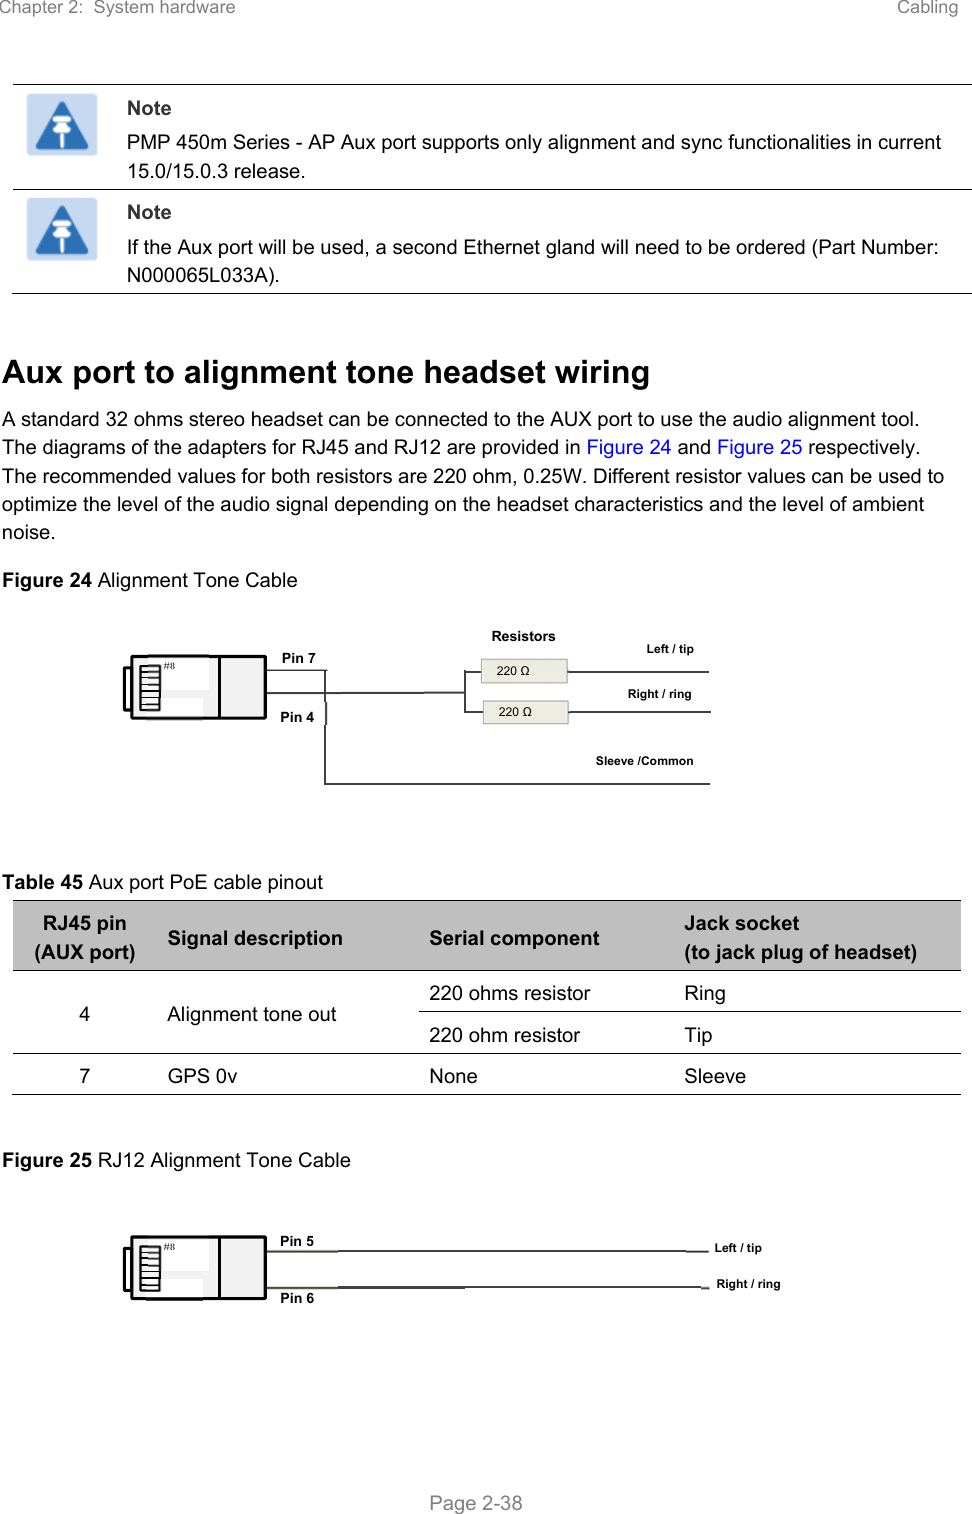 Chapter 2:  System hardware  Cabling   Page 2-38  Note PMP 450m Series - AP Aux port supports only alignment and sync functionalities in current 15.0/15.0.3 release.  Note If the Aux port will be used, a second Ethernet gland will need to be ordered (Part Number: N000065L033A).    Aux port to alignment tone headset wiring A standard 32 ohms stereo headset can be connected to the AUX port to use the audio alignment tool. The diagrams of the adapters for RJ45 and RJ12 are provided in Figure 24 and Figure 25 respectively. The recommended values for both resistors are 220 ohm, 0.25W. Different resistor values can be used to optimize the level of the audio signal depending on the headset characteristics and the level of ambient noise. Figure 24 Alignment Tone Cable   Table 45 Aux port PoE cable pinout RJ45 pin (AUX port)  Signal description  Serial component  Jack socket (to jack plug of headset) 4  Alignment tone out  220 ohms resistor  Ring 220 ohm resistor  Tip 7  GPS 0v  None  Sleeve  Figure 25 RJ12 Alignment Tone Cable  220 Ω 220 Ω Resistors Pin 7 Pin 4 Left/ tipRight / ring  Sleeve /Common#8  Pin 5 Pin 6 Left / tip Right / ring #8  